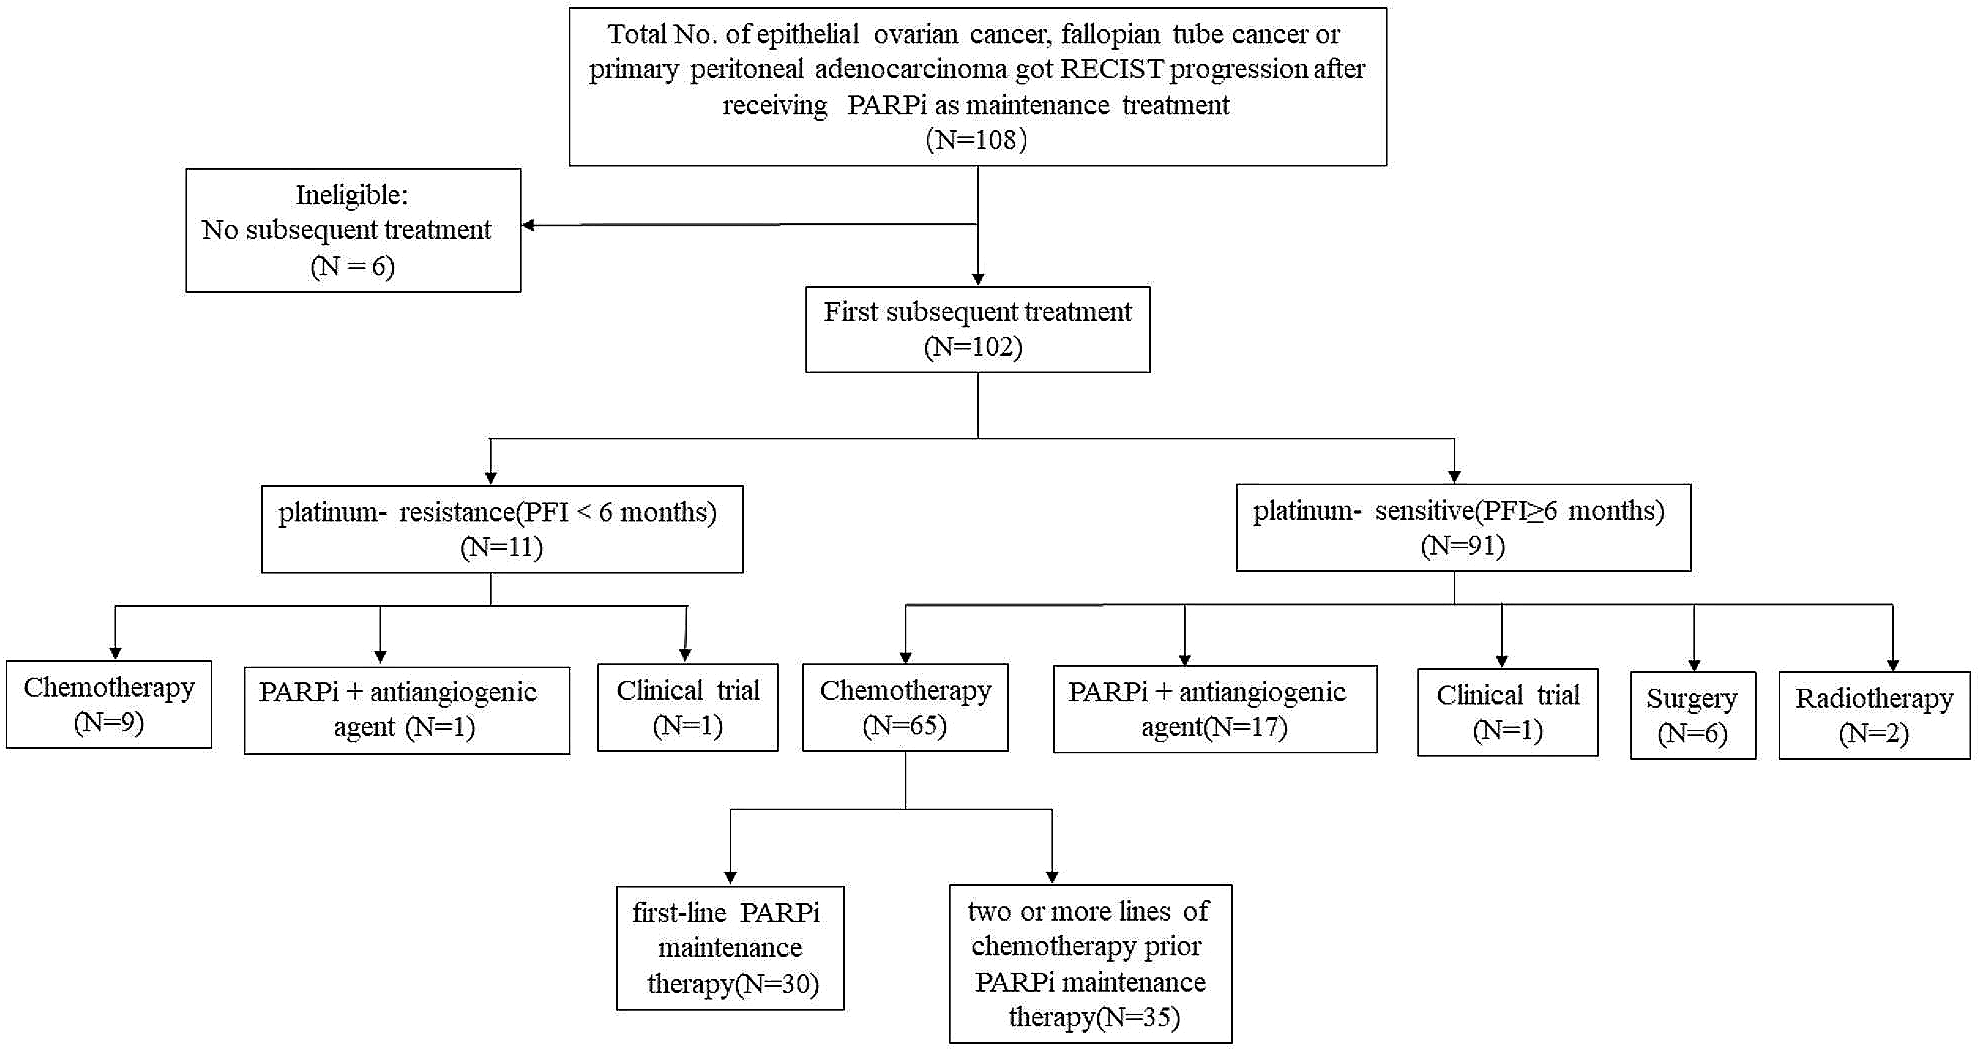 A real-world study of treatment patterns following disease progression in epithelial ovarian cancer patients undergoing poly-ADP-ribose polymerase inhibitor maintenance therapy